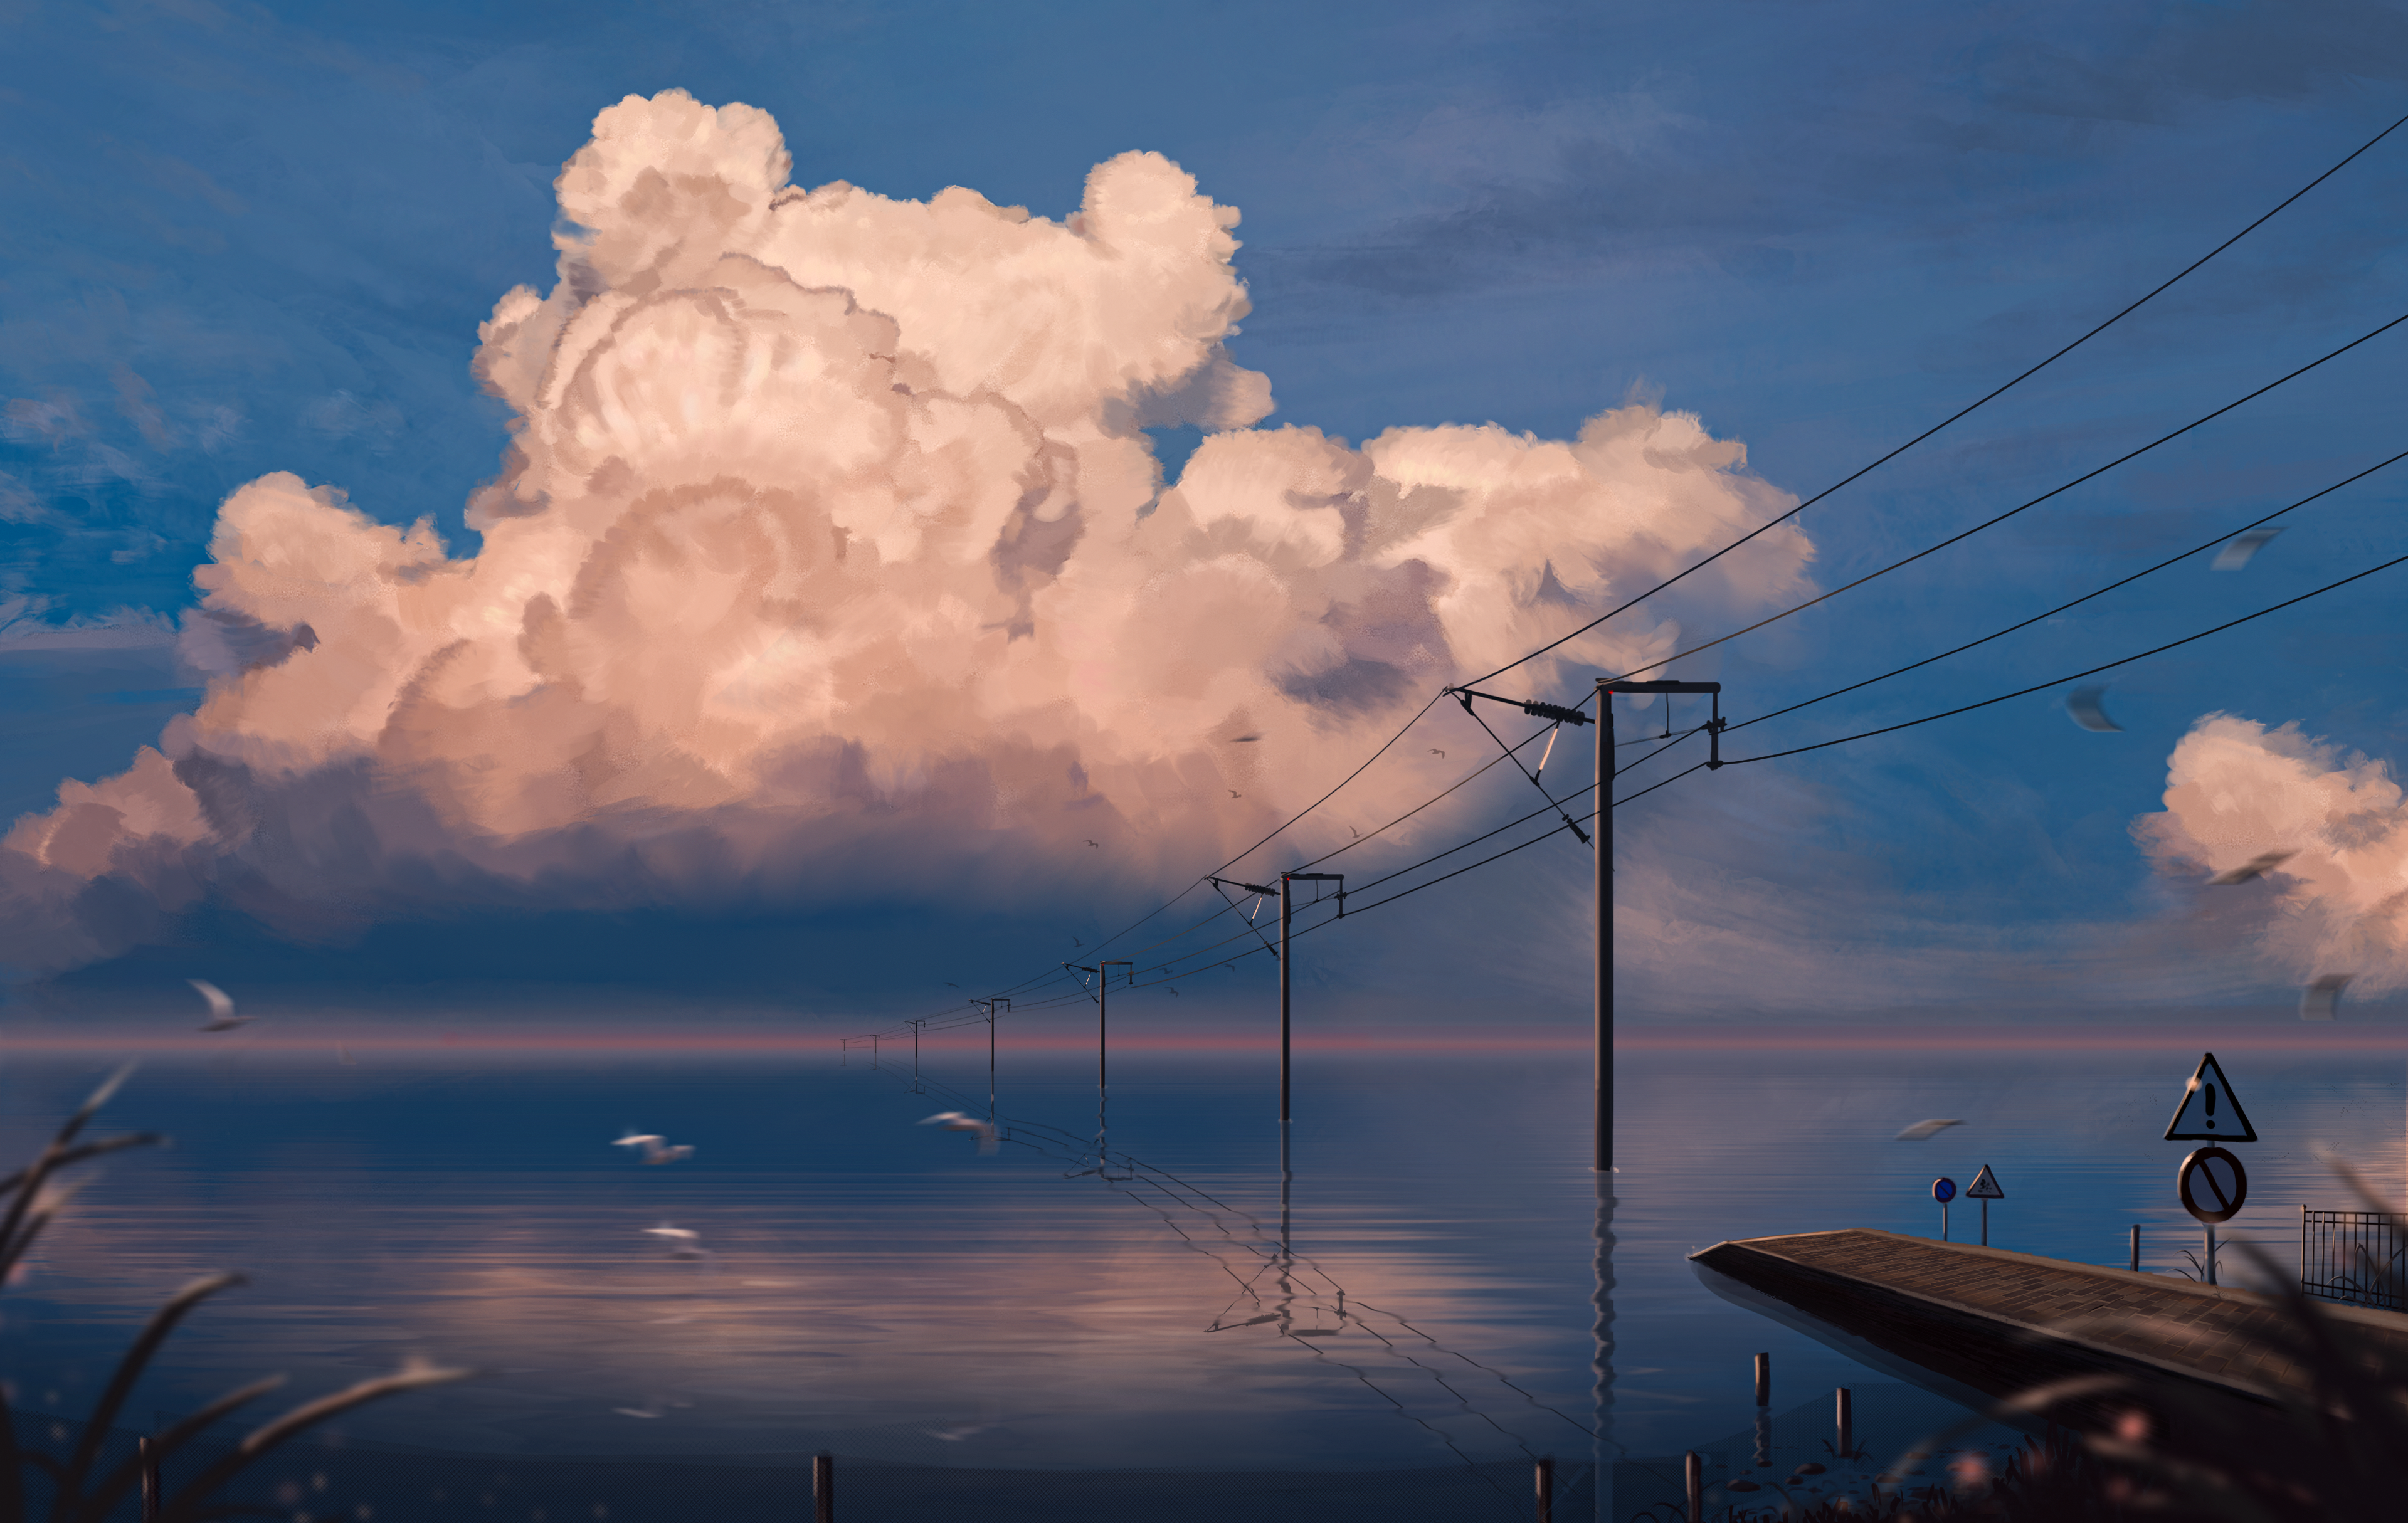 Anime 3840x2429 anime clouds outdoors power lines sign water sky Yu jing digital art